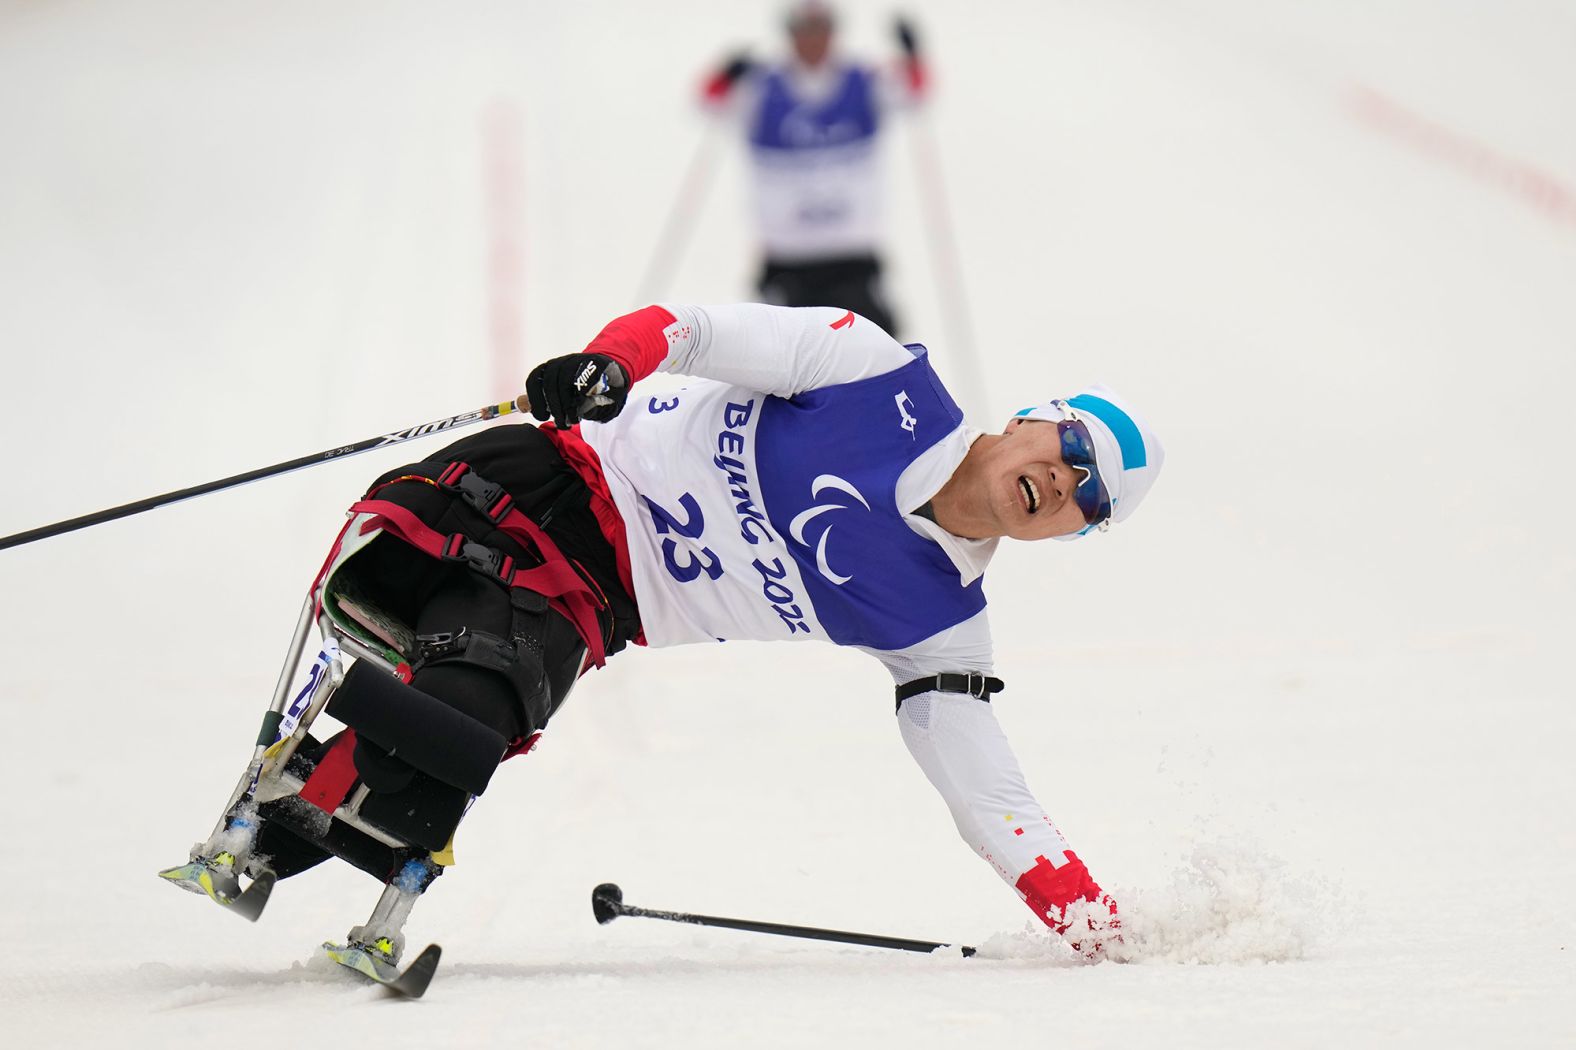 China's Zhu Yunfeng loses balance during a biathlon event on March 11.